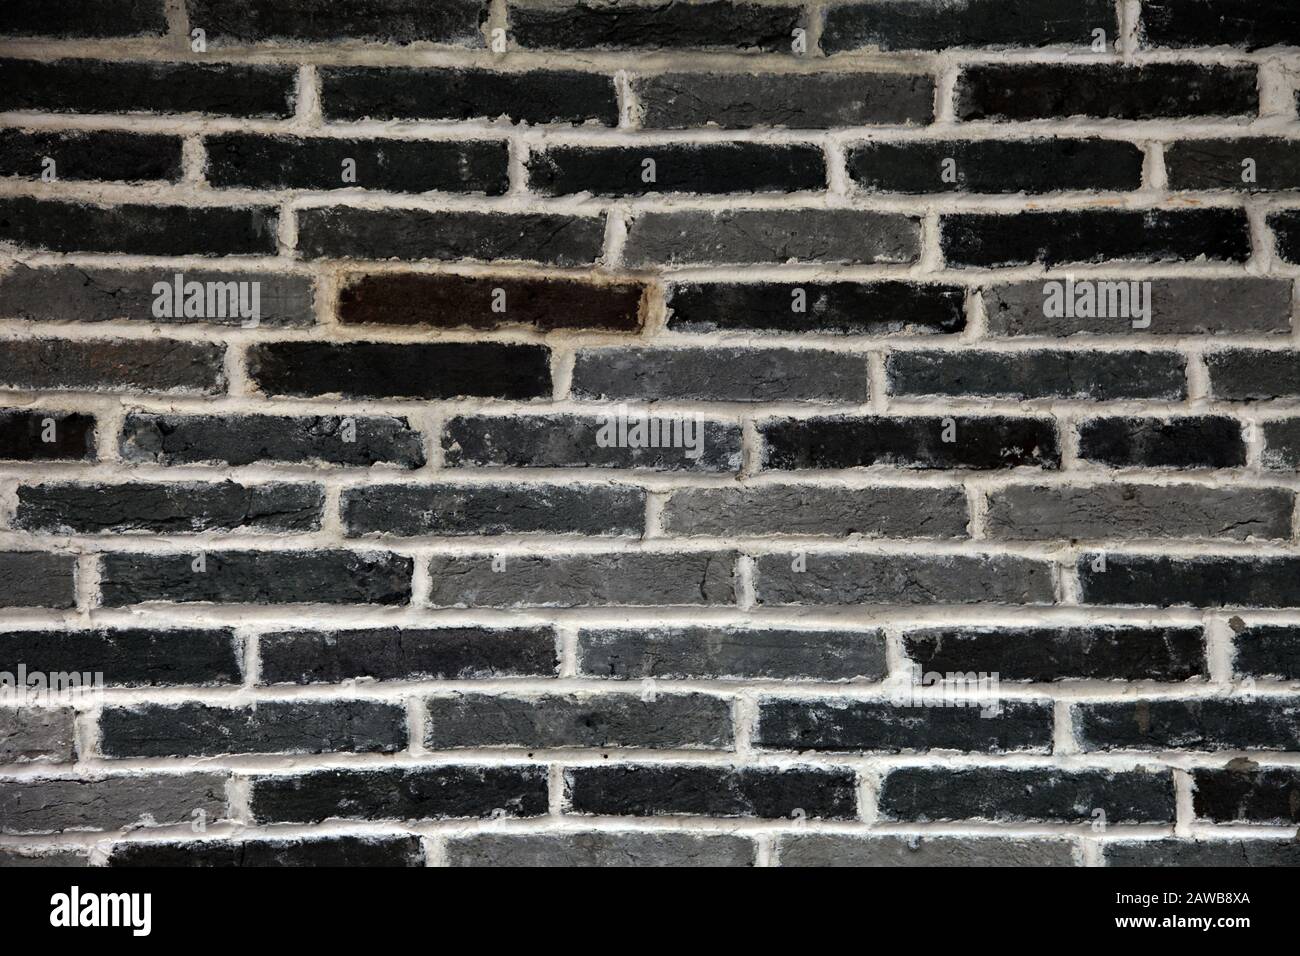 it's a photo of a wall made of brown or gray grey bricks to use as a background Stock Photo